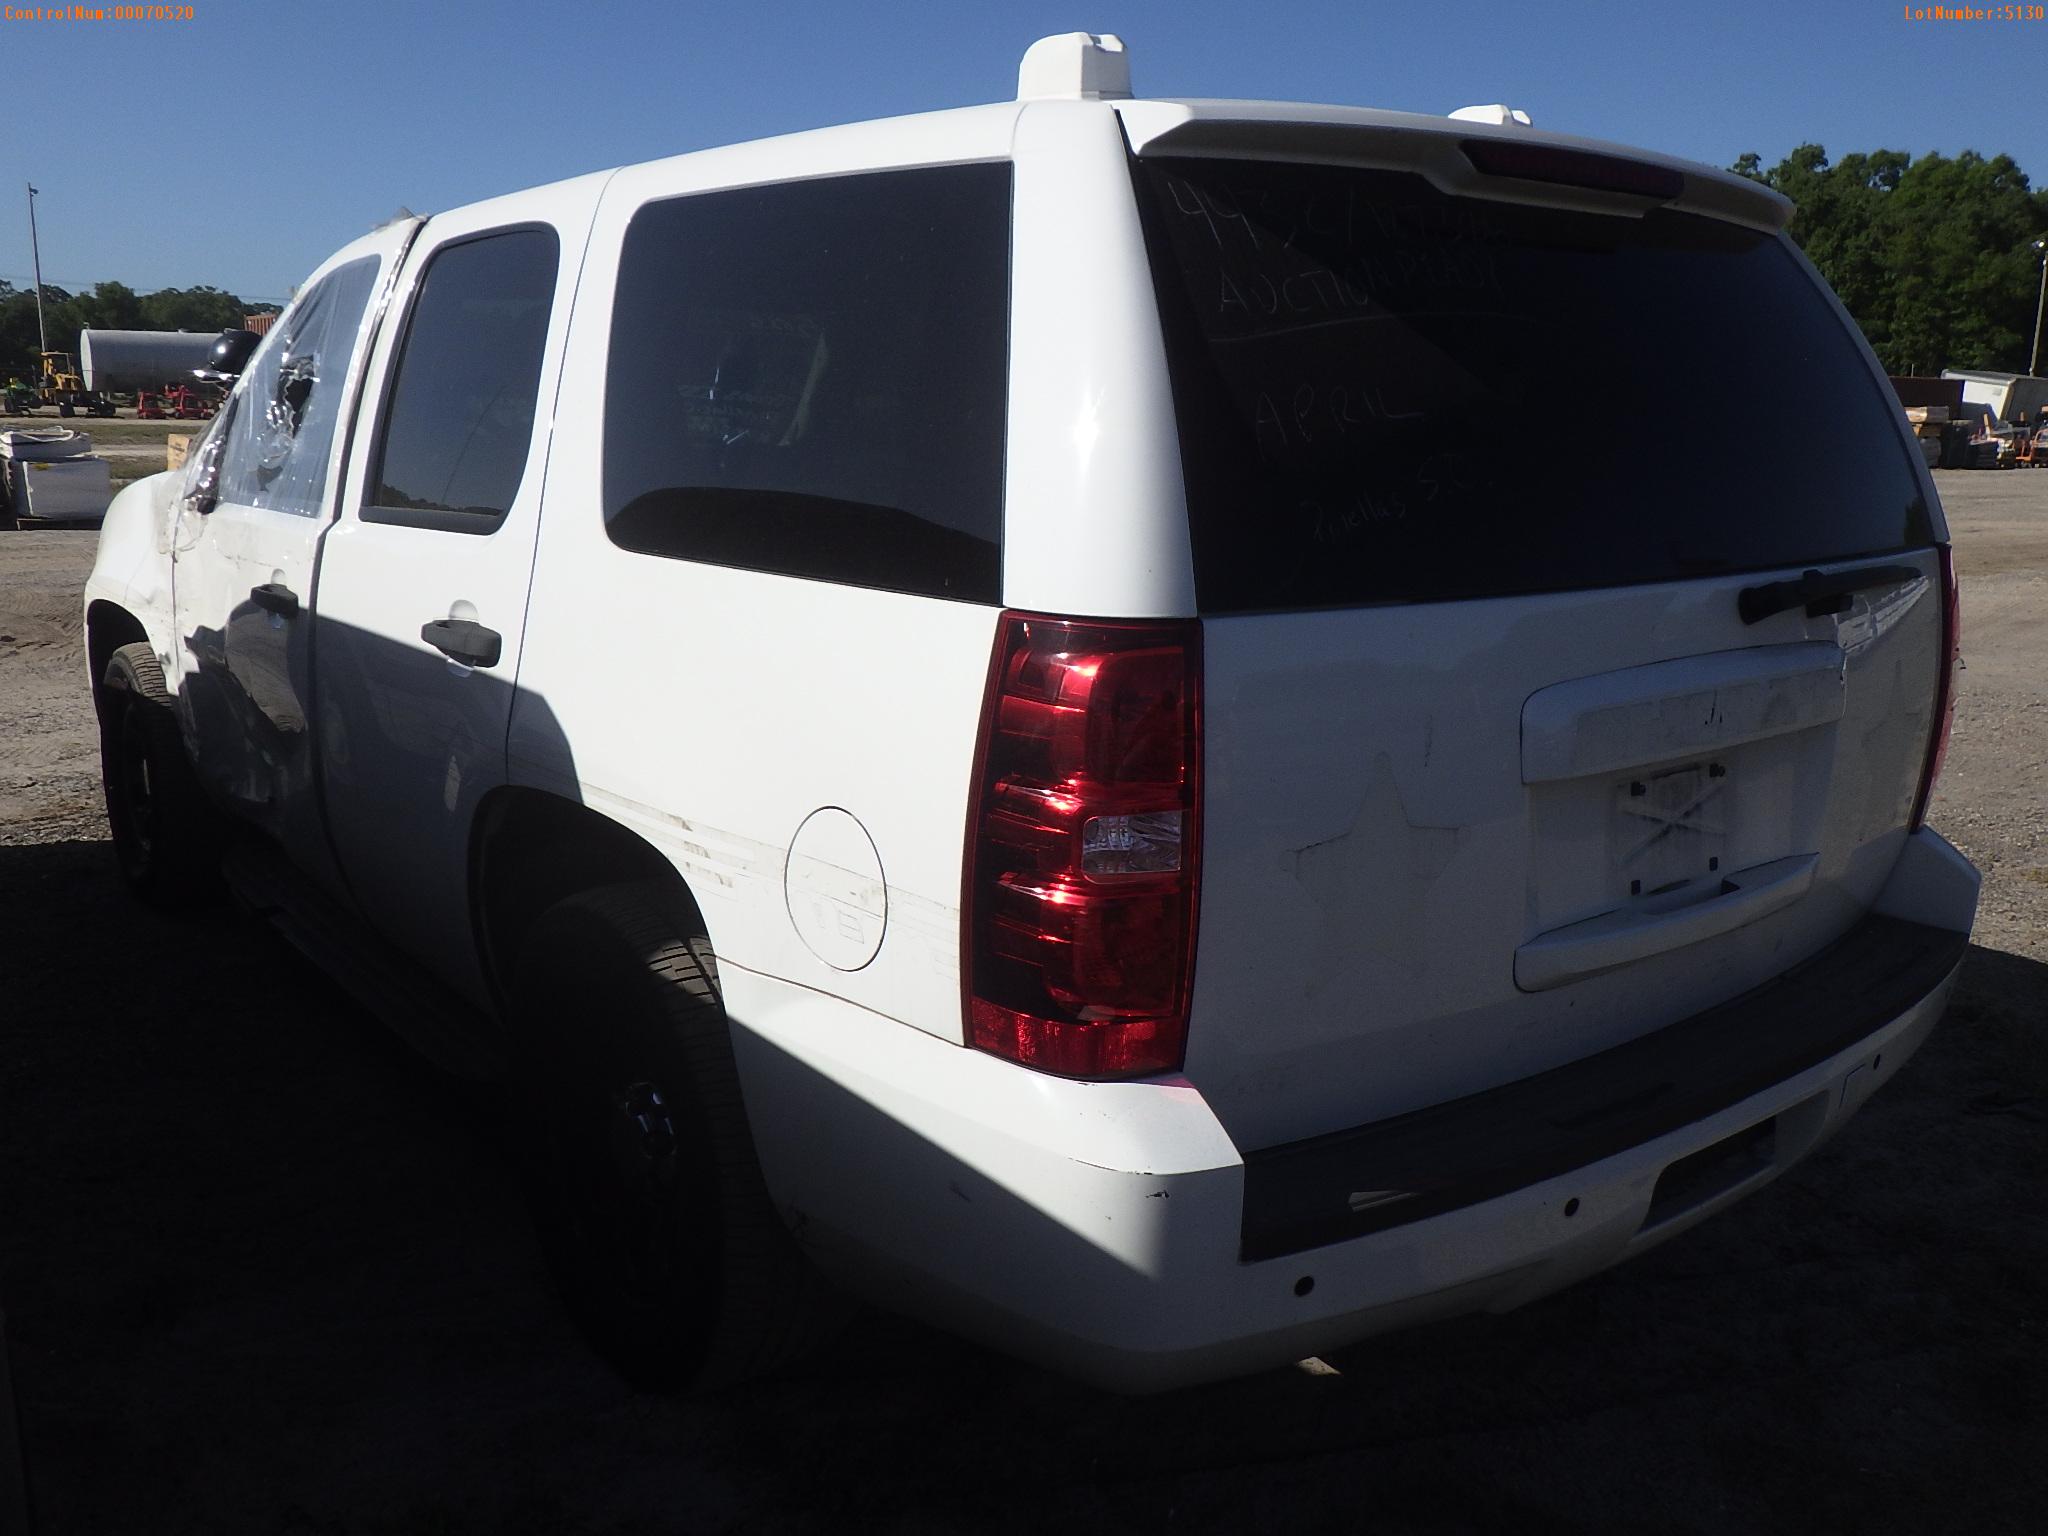 4-05130 (Cars-SUV 4D)  Seller: Gov-Pinellas County Sheriffs Ofc 2013 CHEV TAHOE